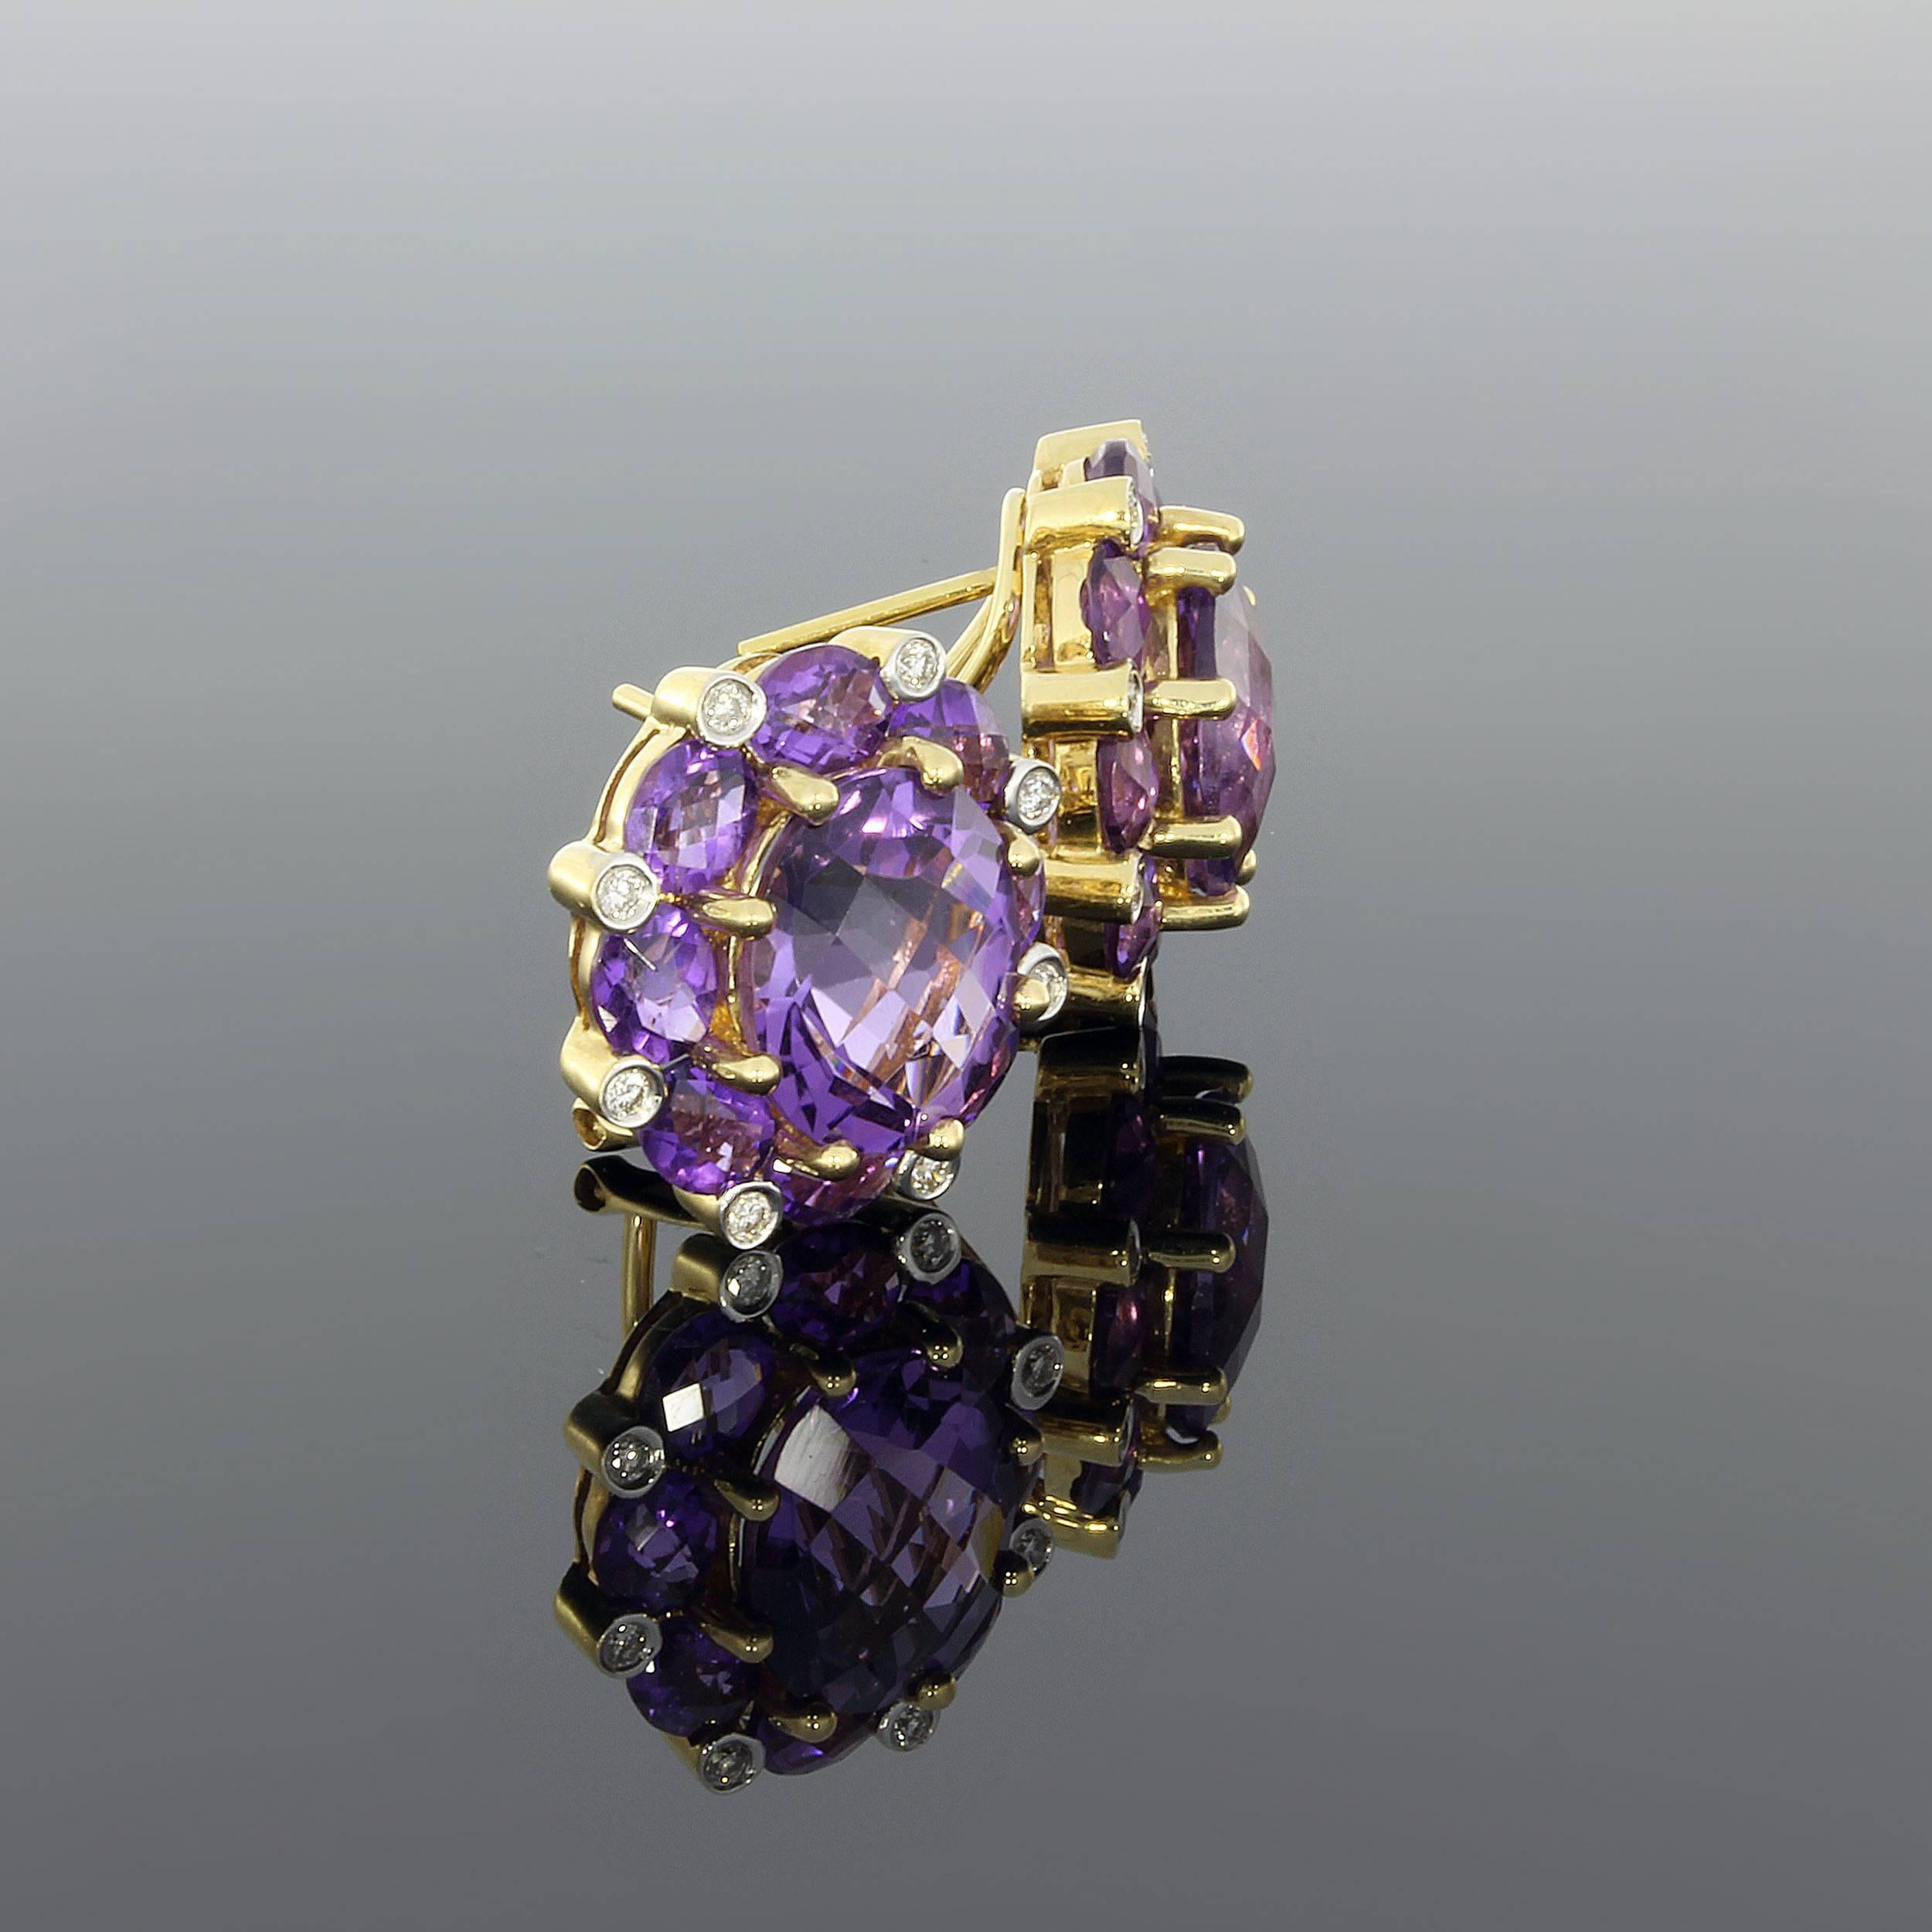 Set with 9 oval- and round shaped amethyst decorated by 8 brilliant-cut bezel setting diamonds weighing 0,30 ct. Mounted in 14 K yellow gold. Weight: 12,5 grams. Measurements: 0.75 x 0.67 in ( 1,9 x 1,7 cm )